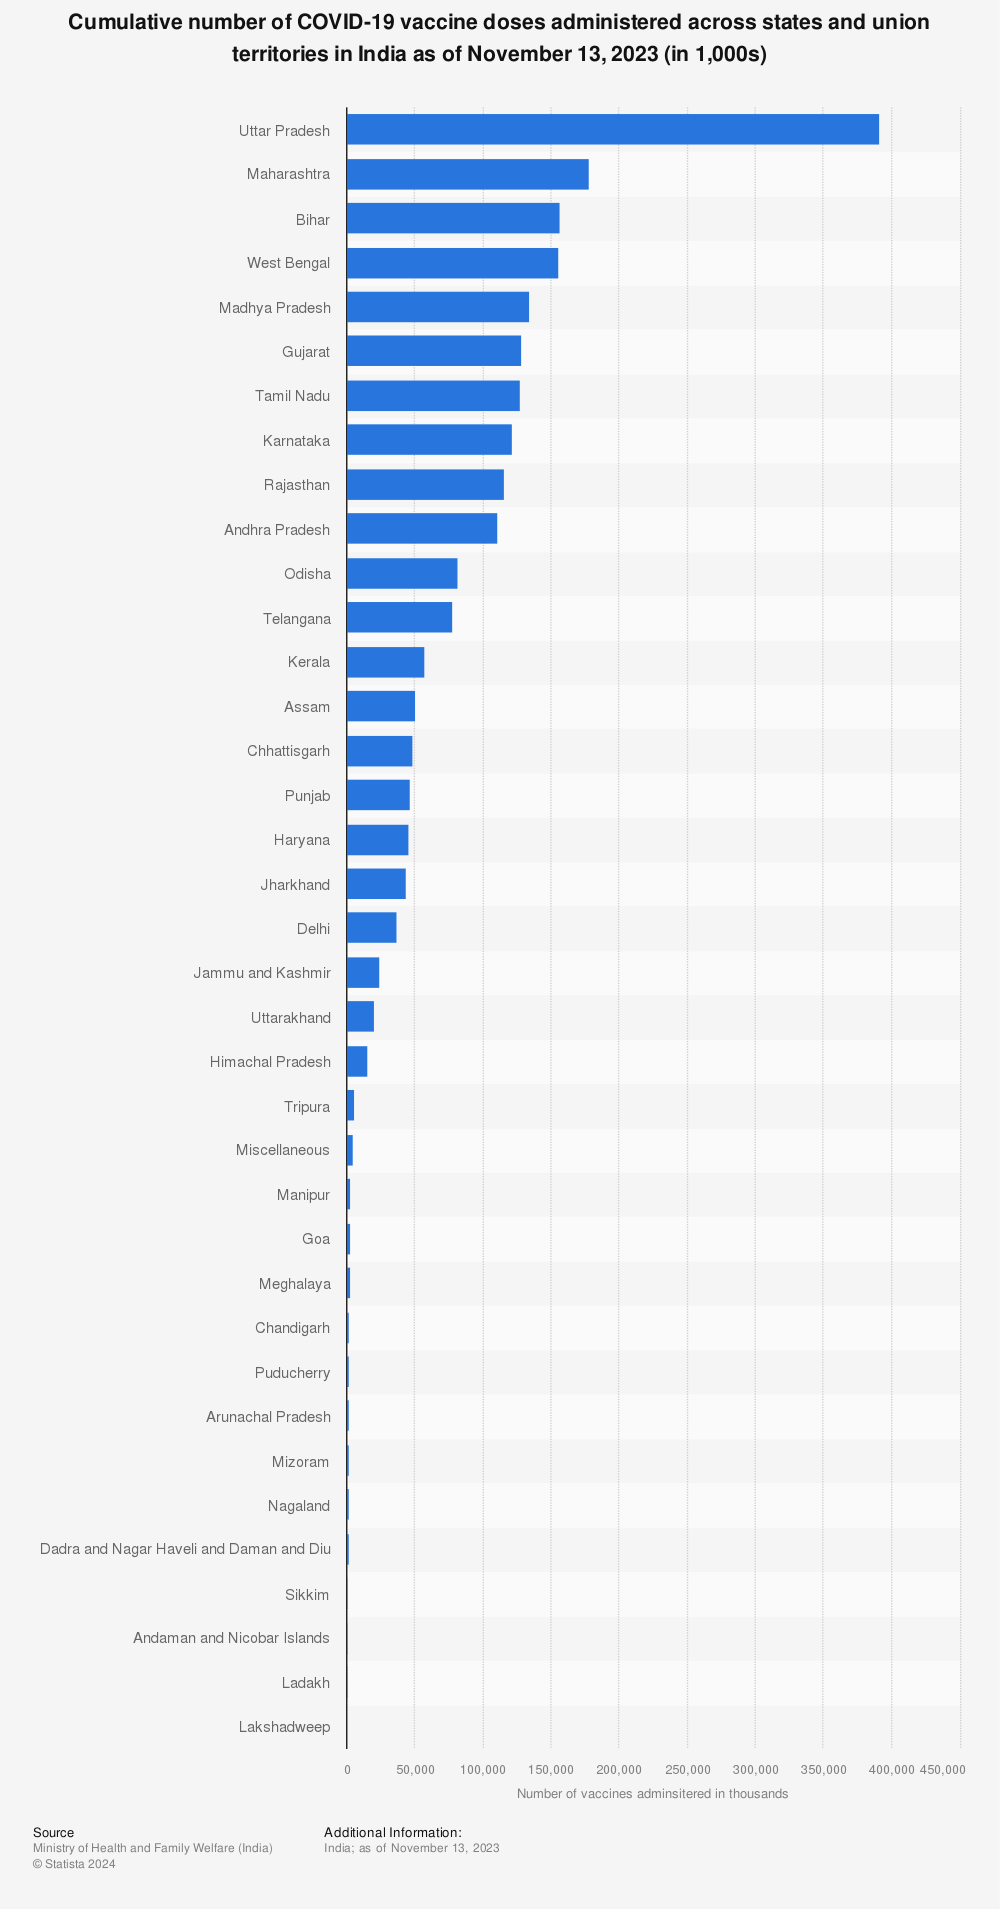 Statistic: Cumulative number of COVID-19 vaccine doses administered across states and union territories in India as of July 21, 2022 (in 1,000s) | Statista